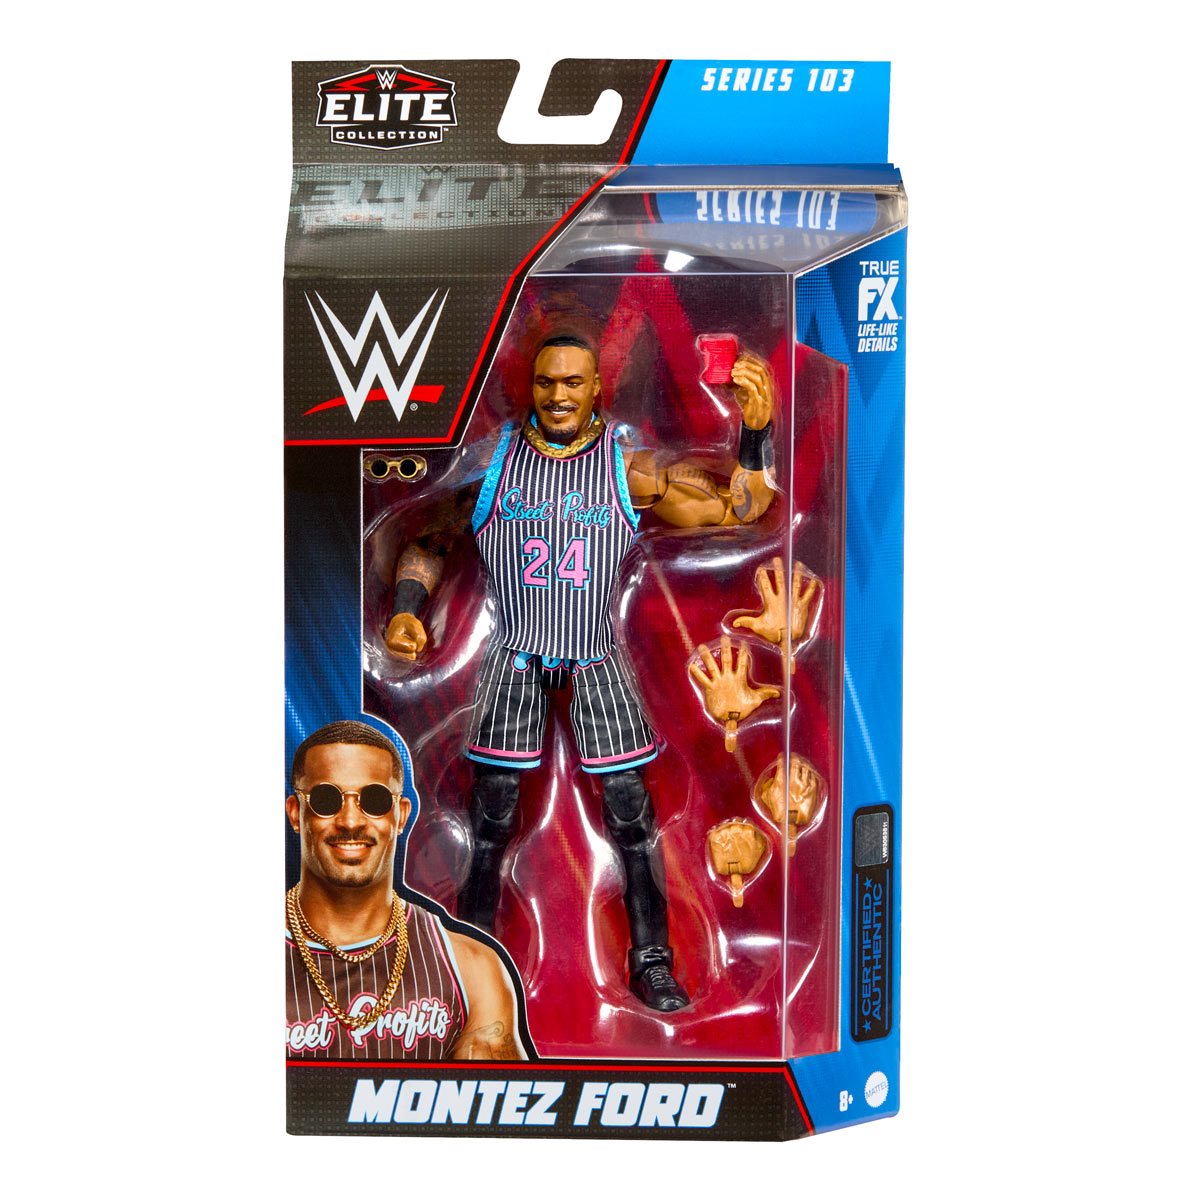 WWE Elite Collection Series 103: Montez Ford